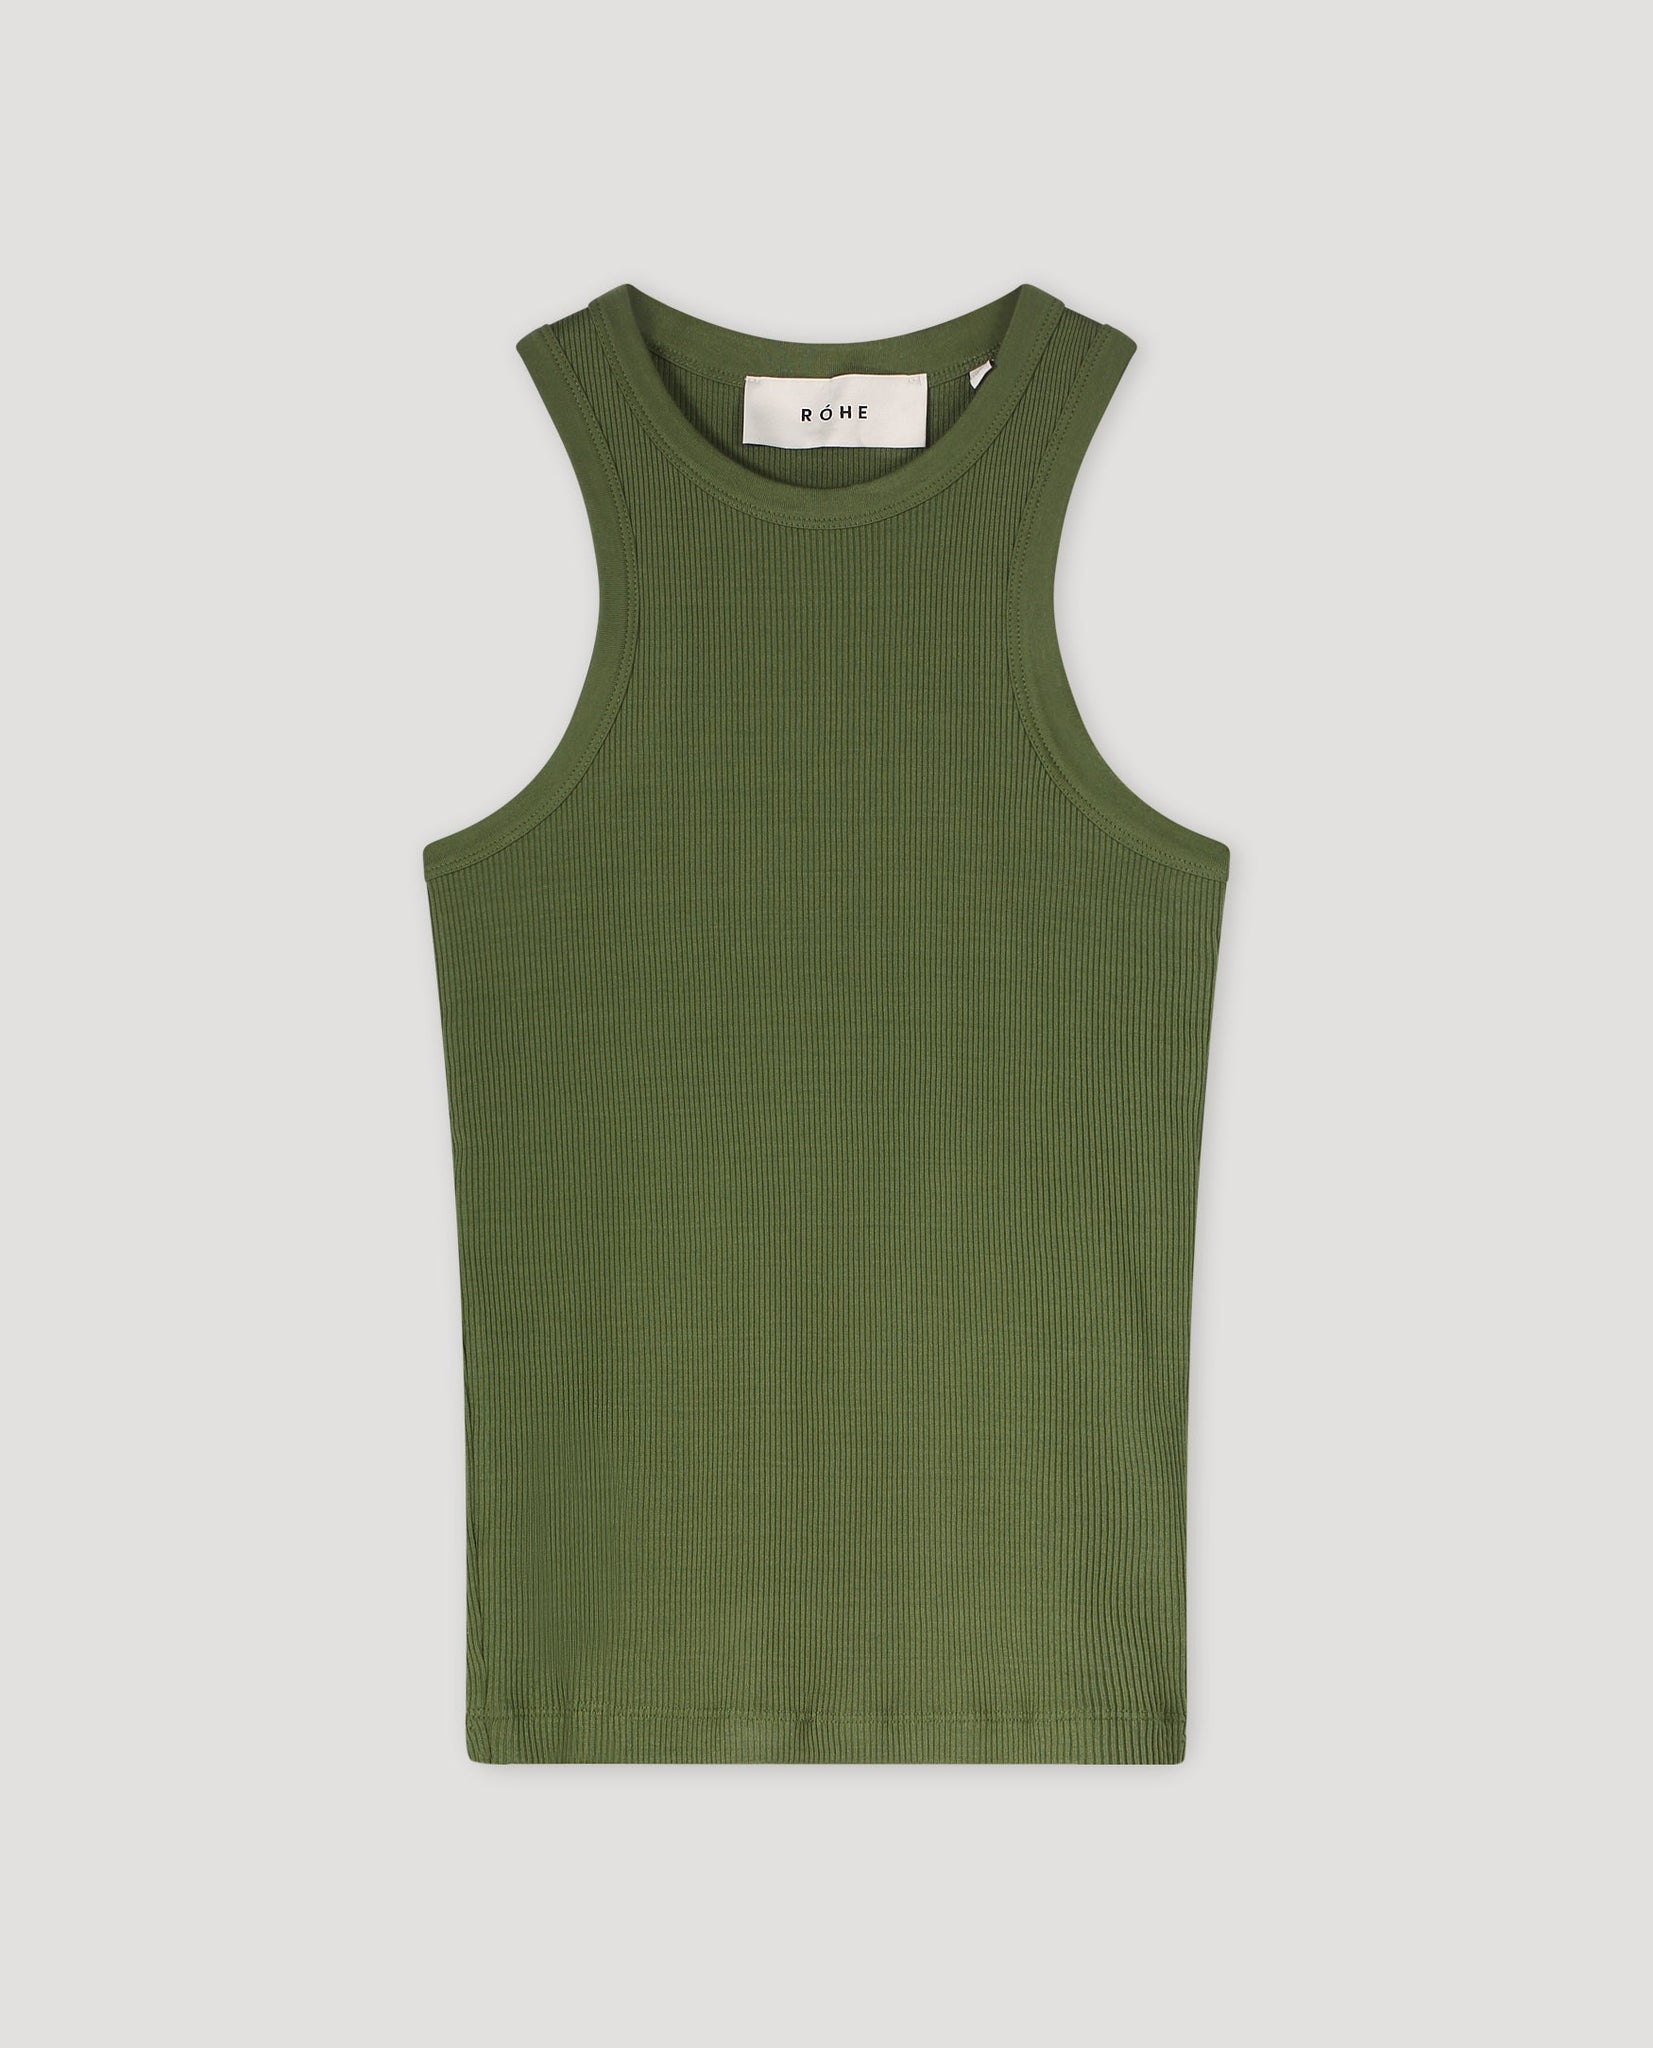 CAR TEE IN PINE GREEN BY RÓHE